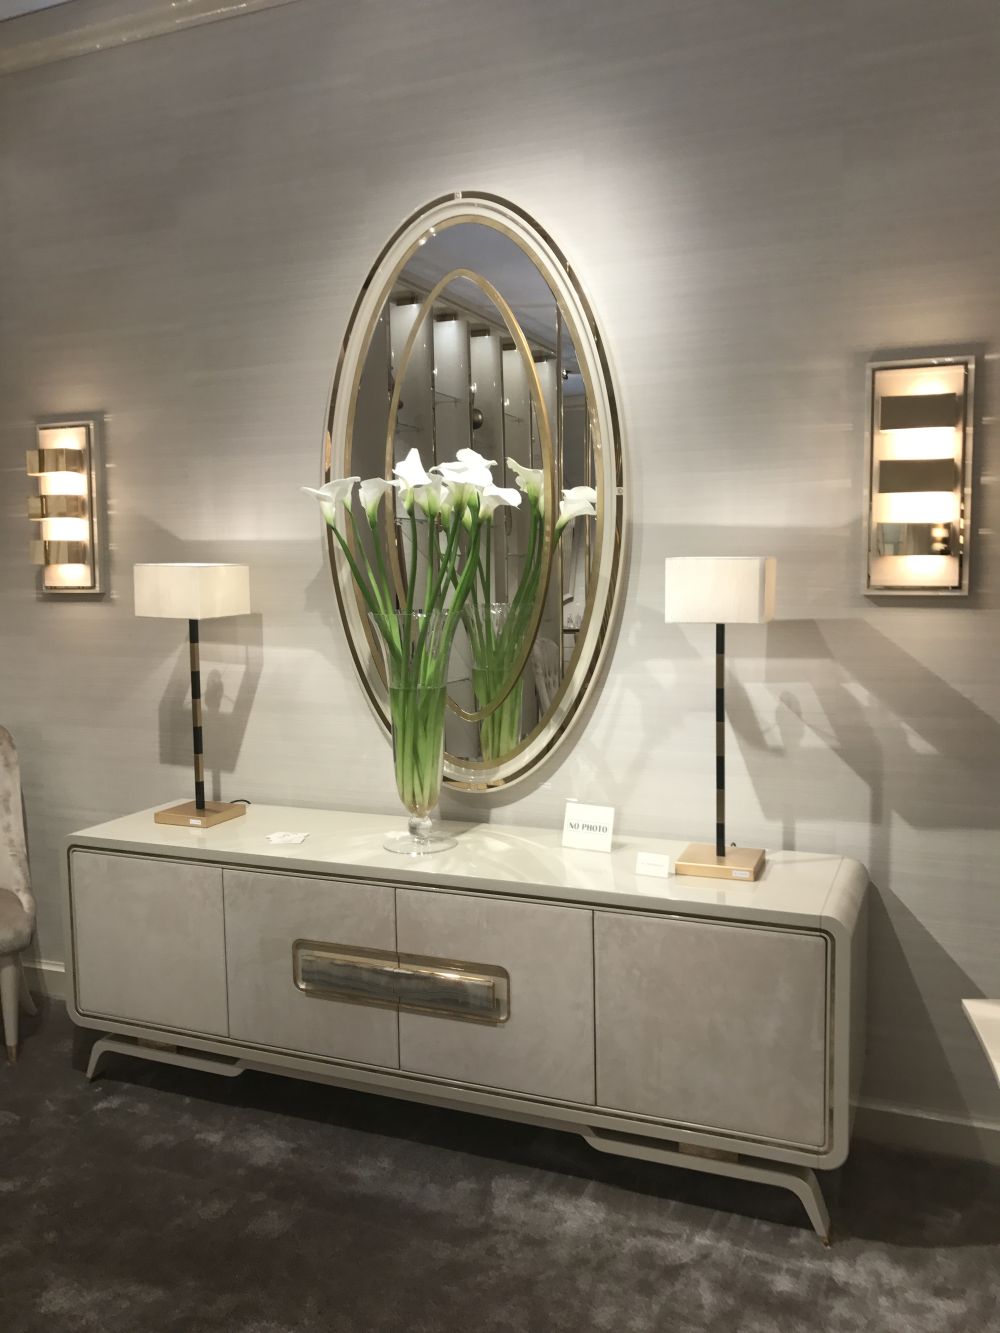 How To Expand And Emphasize A Space With Decorative Mirrors